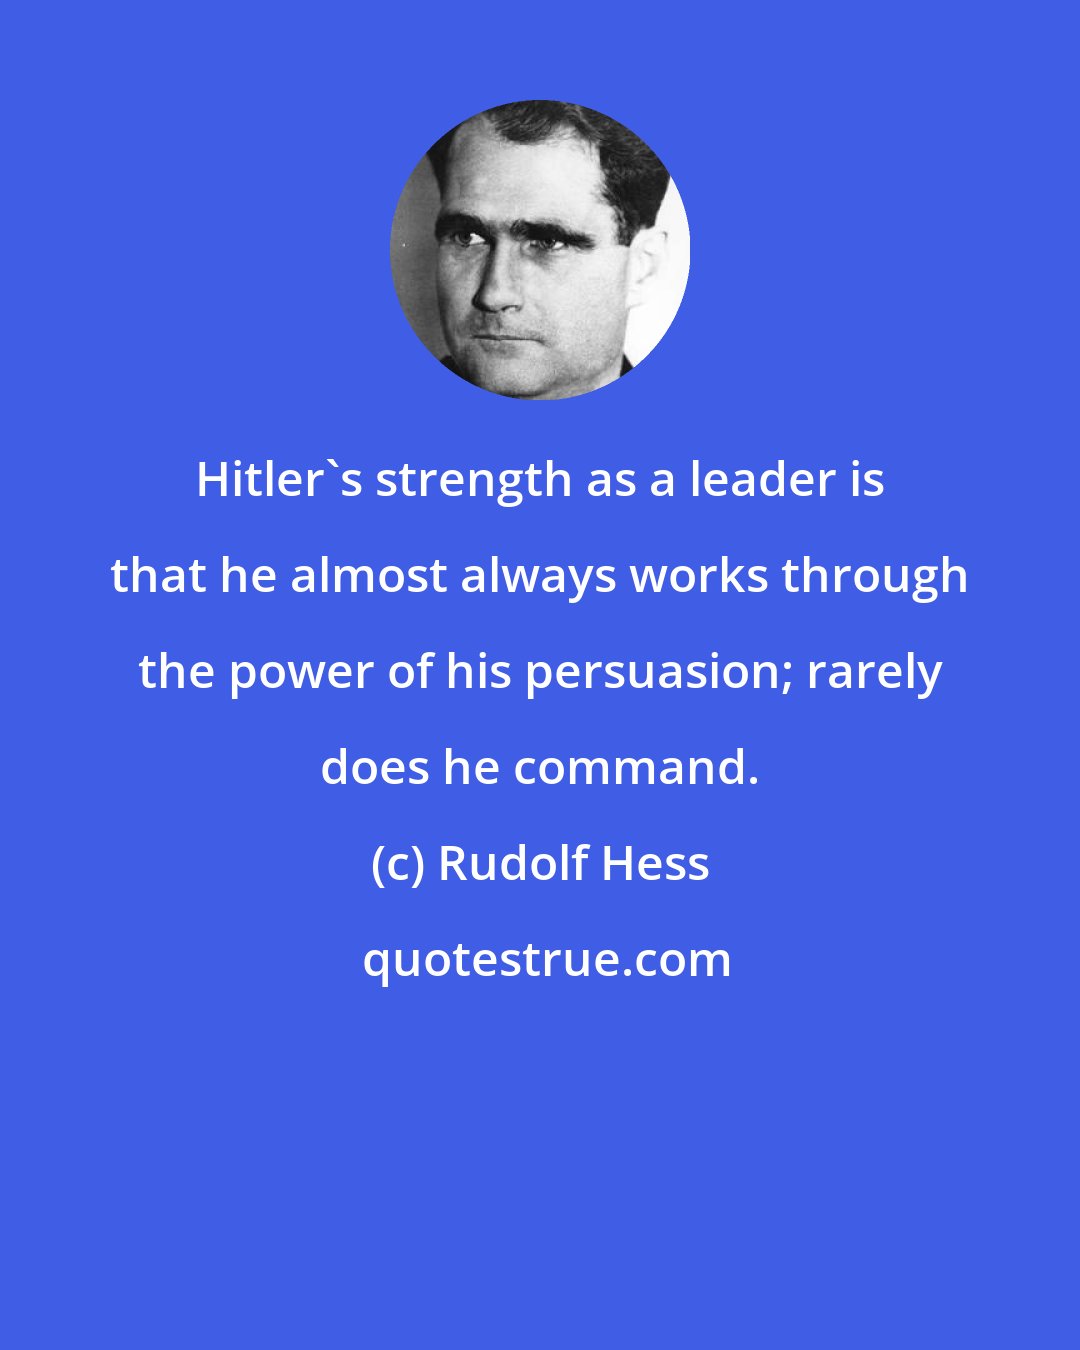 Rudolf Hess: Hitler's strength as a leader is that he almost always works through the power of his persuasion; rarely does he command.